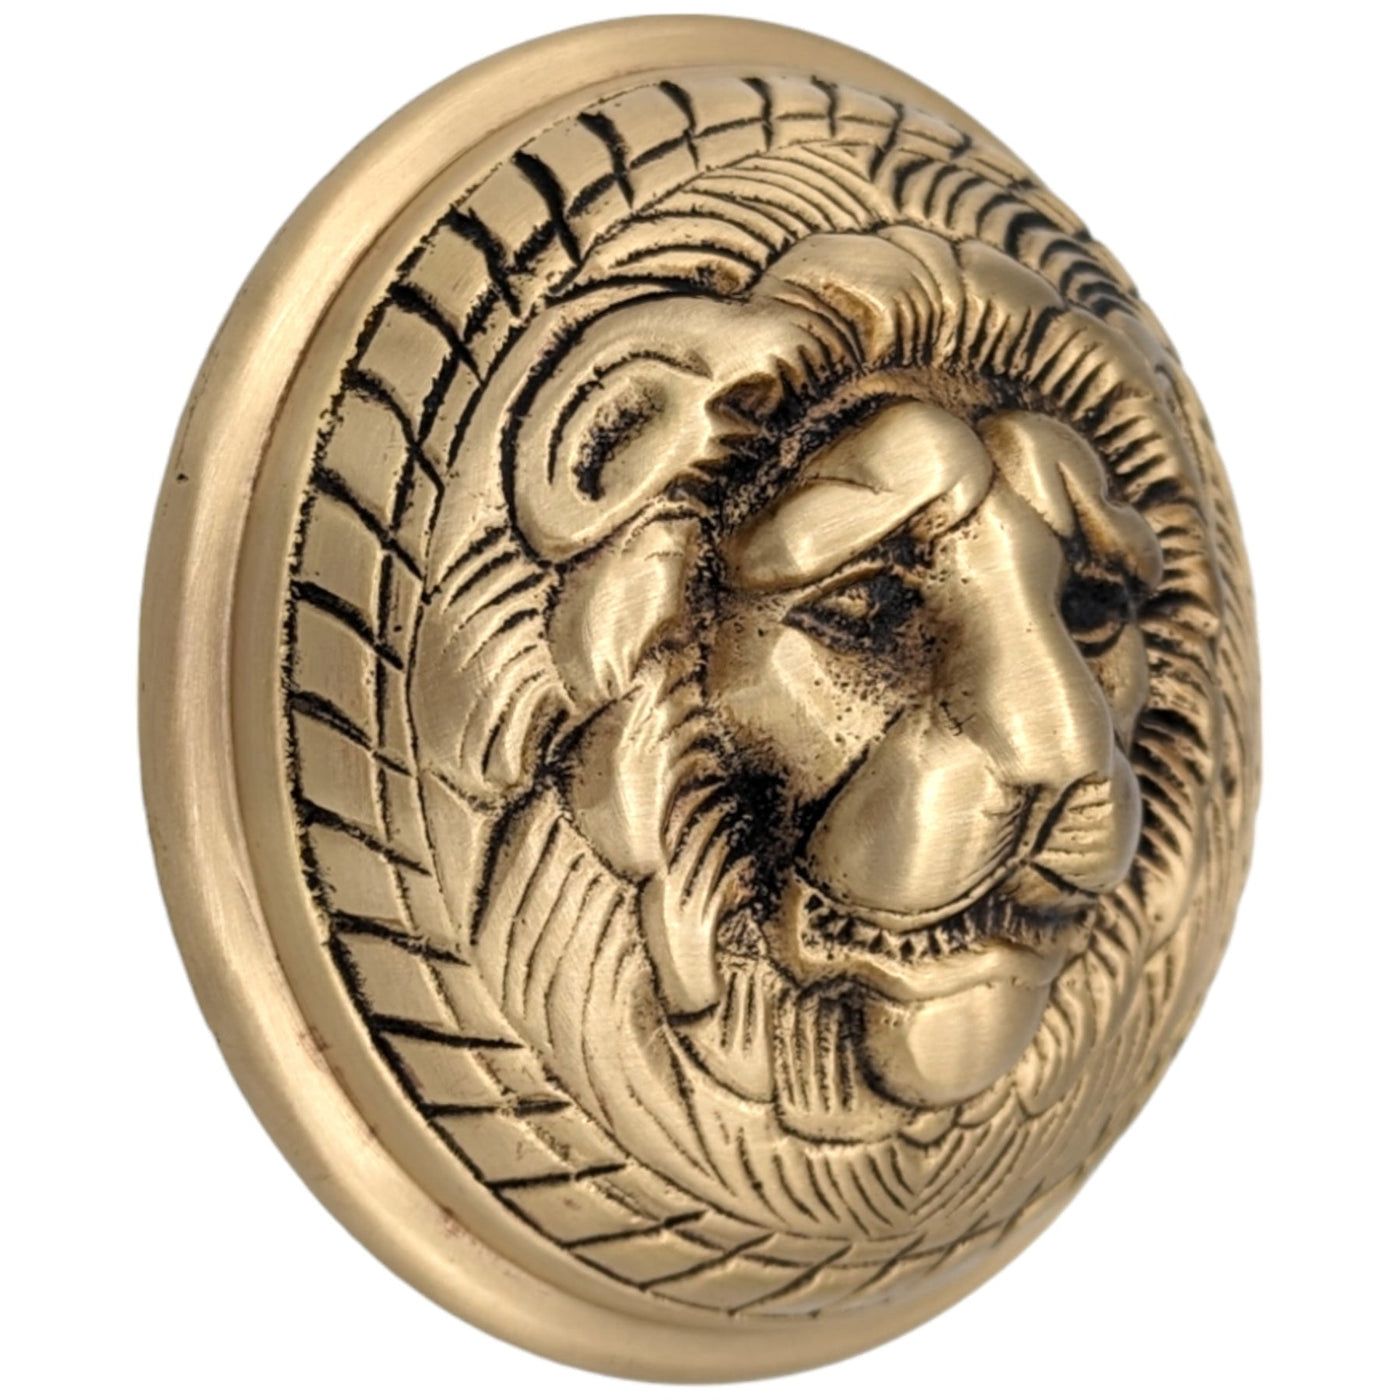 Romanesque Rosette Door Set with Lion Door Knobs (Several Finishes Available)